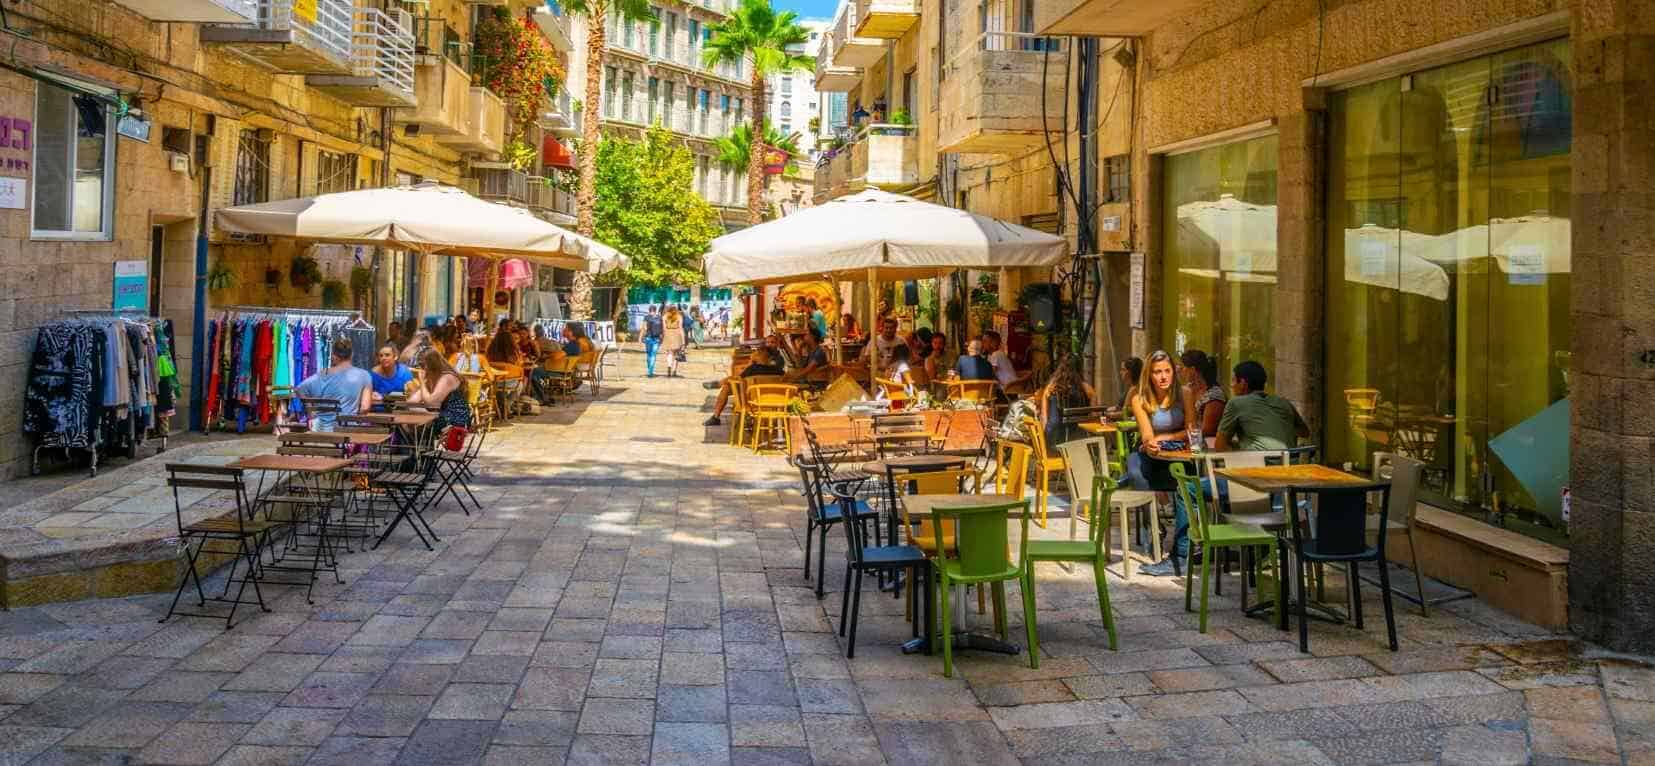 The Best Tips for Tourists in Israel